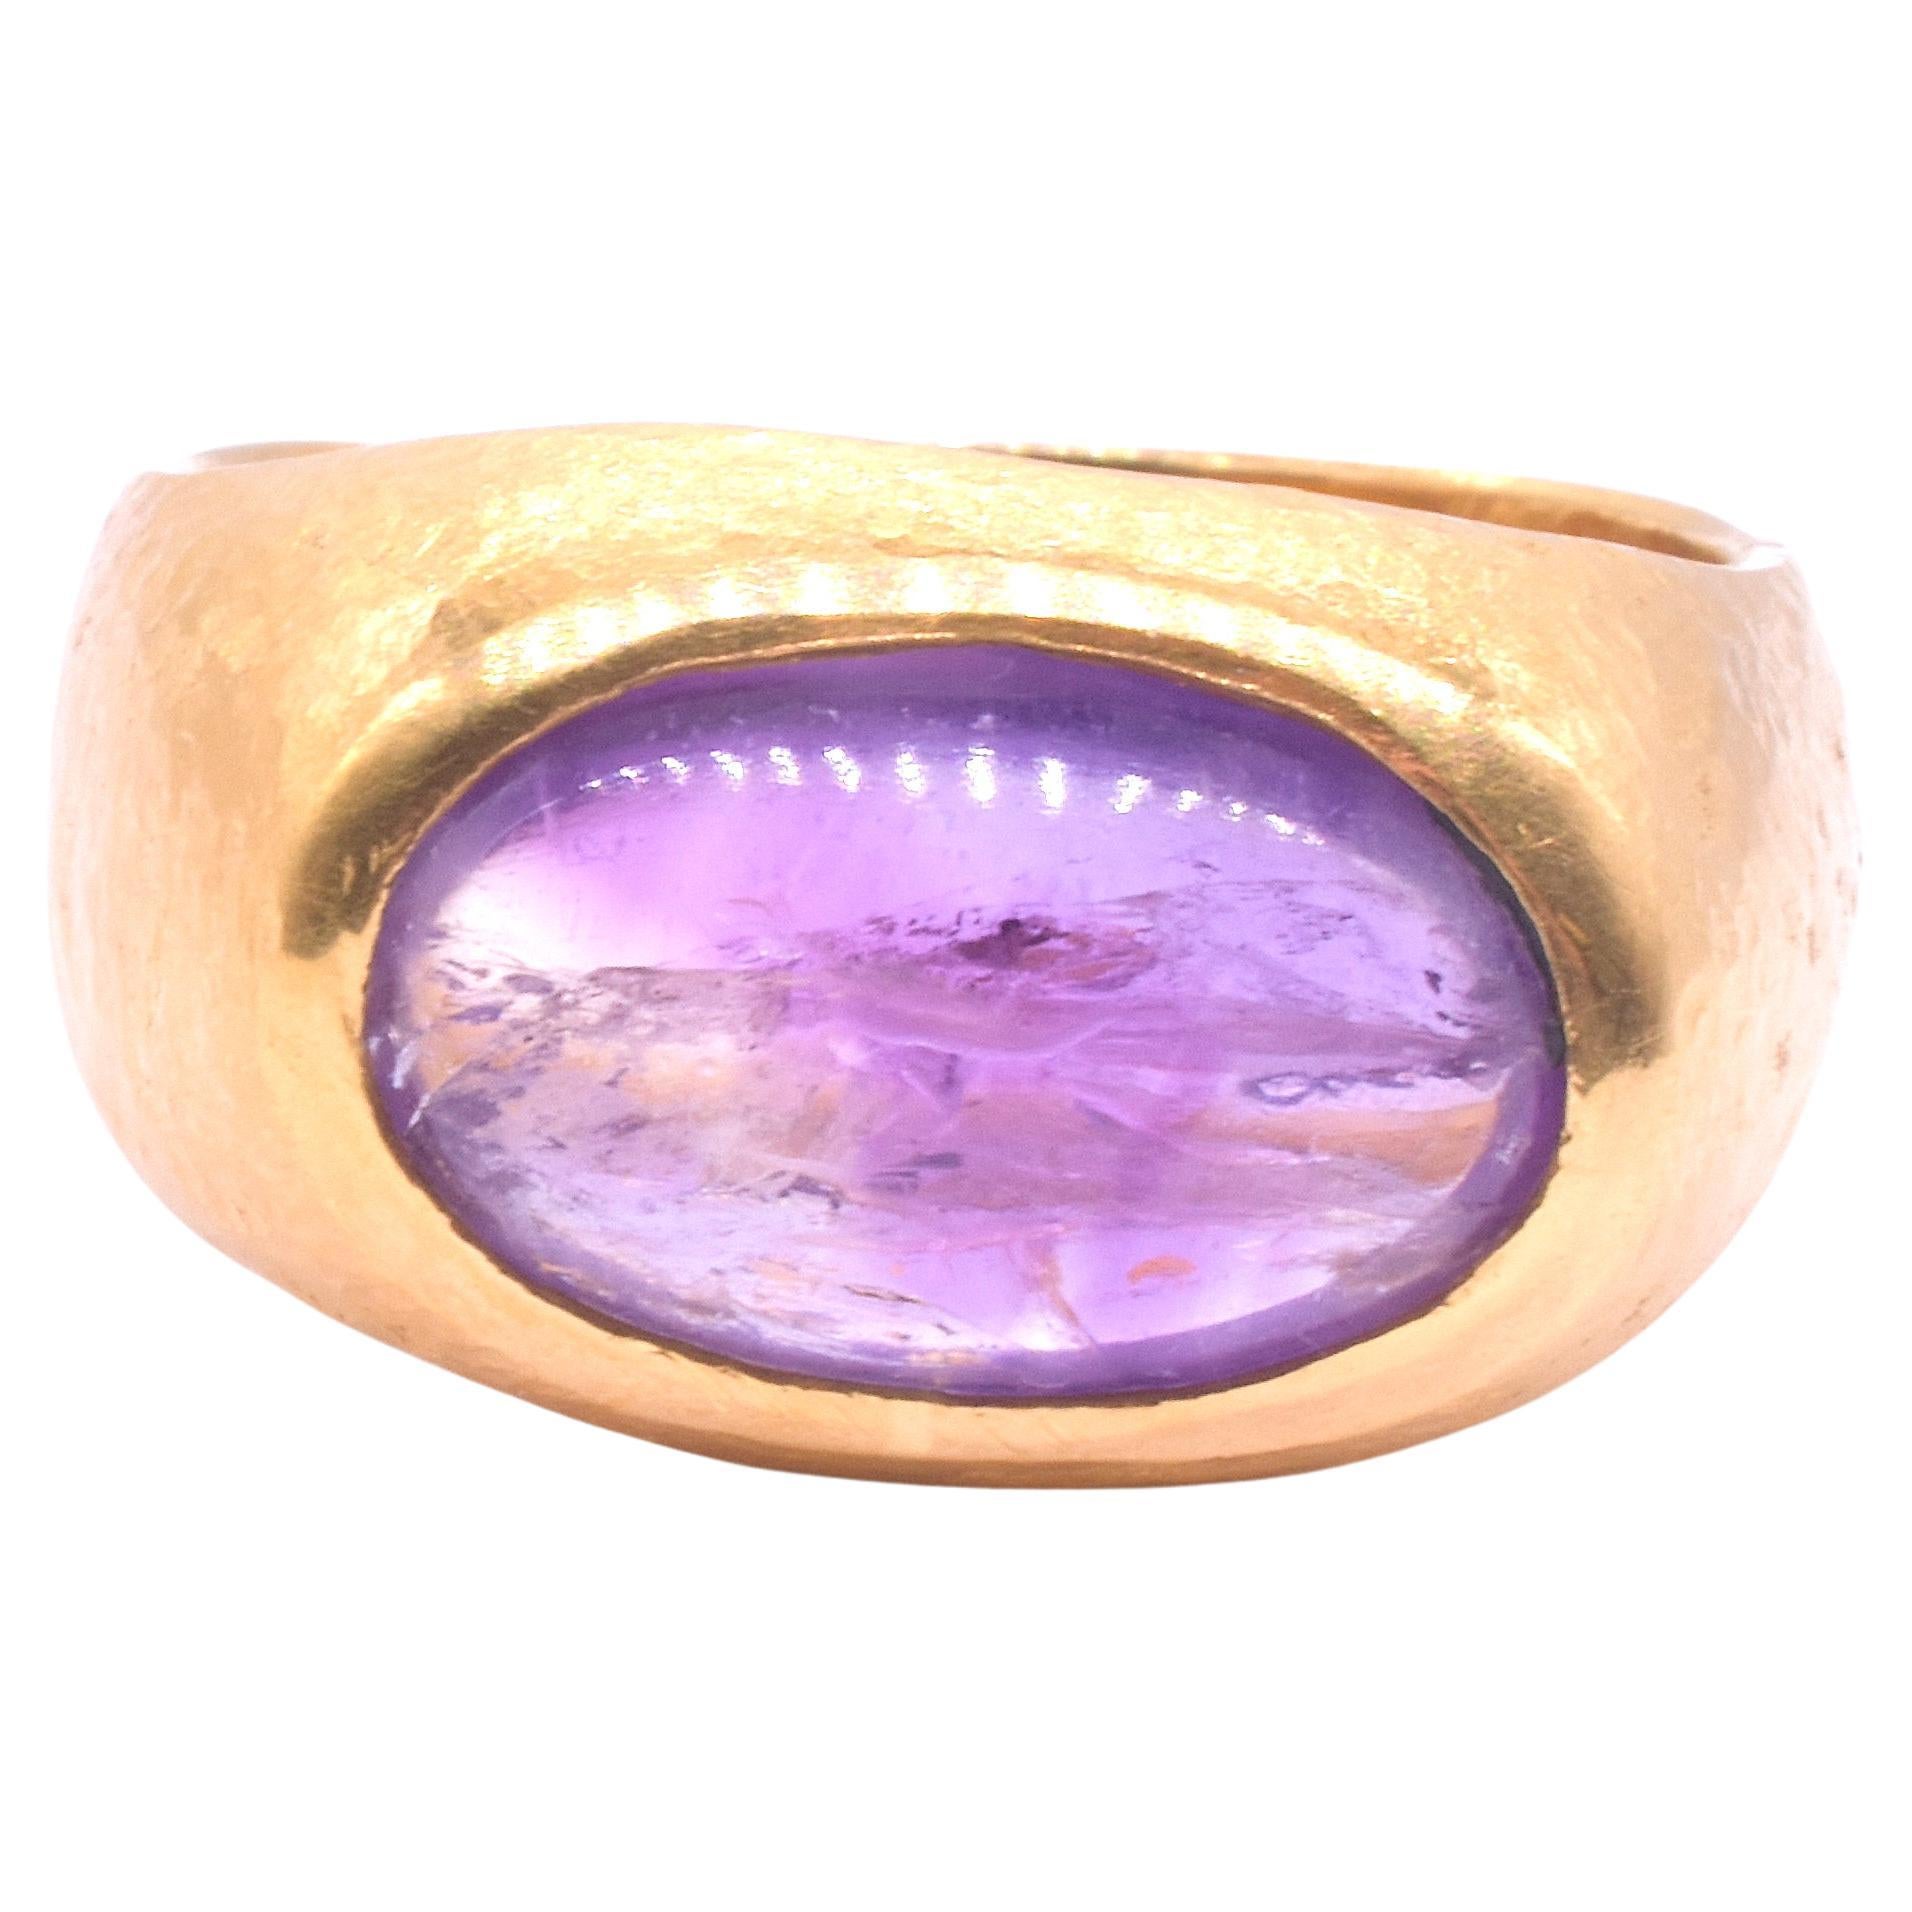 We love the patina of this antique delicate carved amethyst intaglio depicting a charming bird perched on solid ground, beak pointed upward mounted in a later, retro hammered 24K gold band.  The ring is substantial at .38 inch high but not